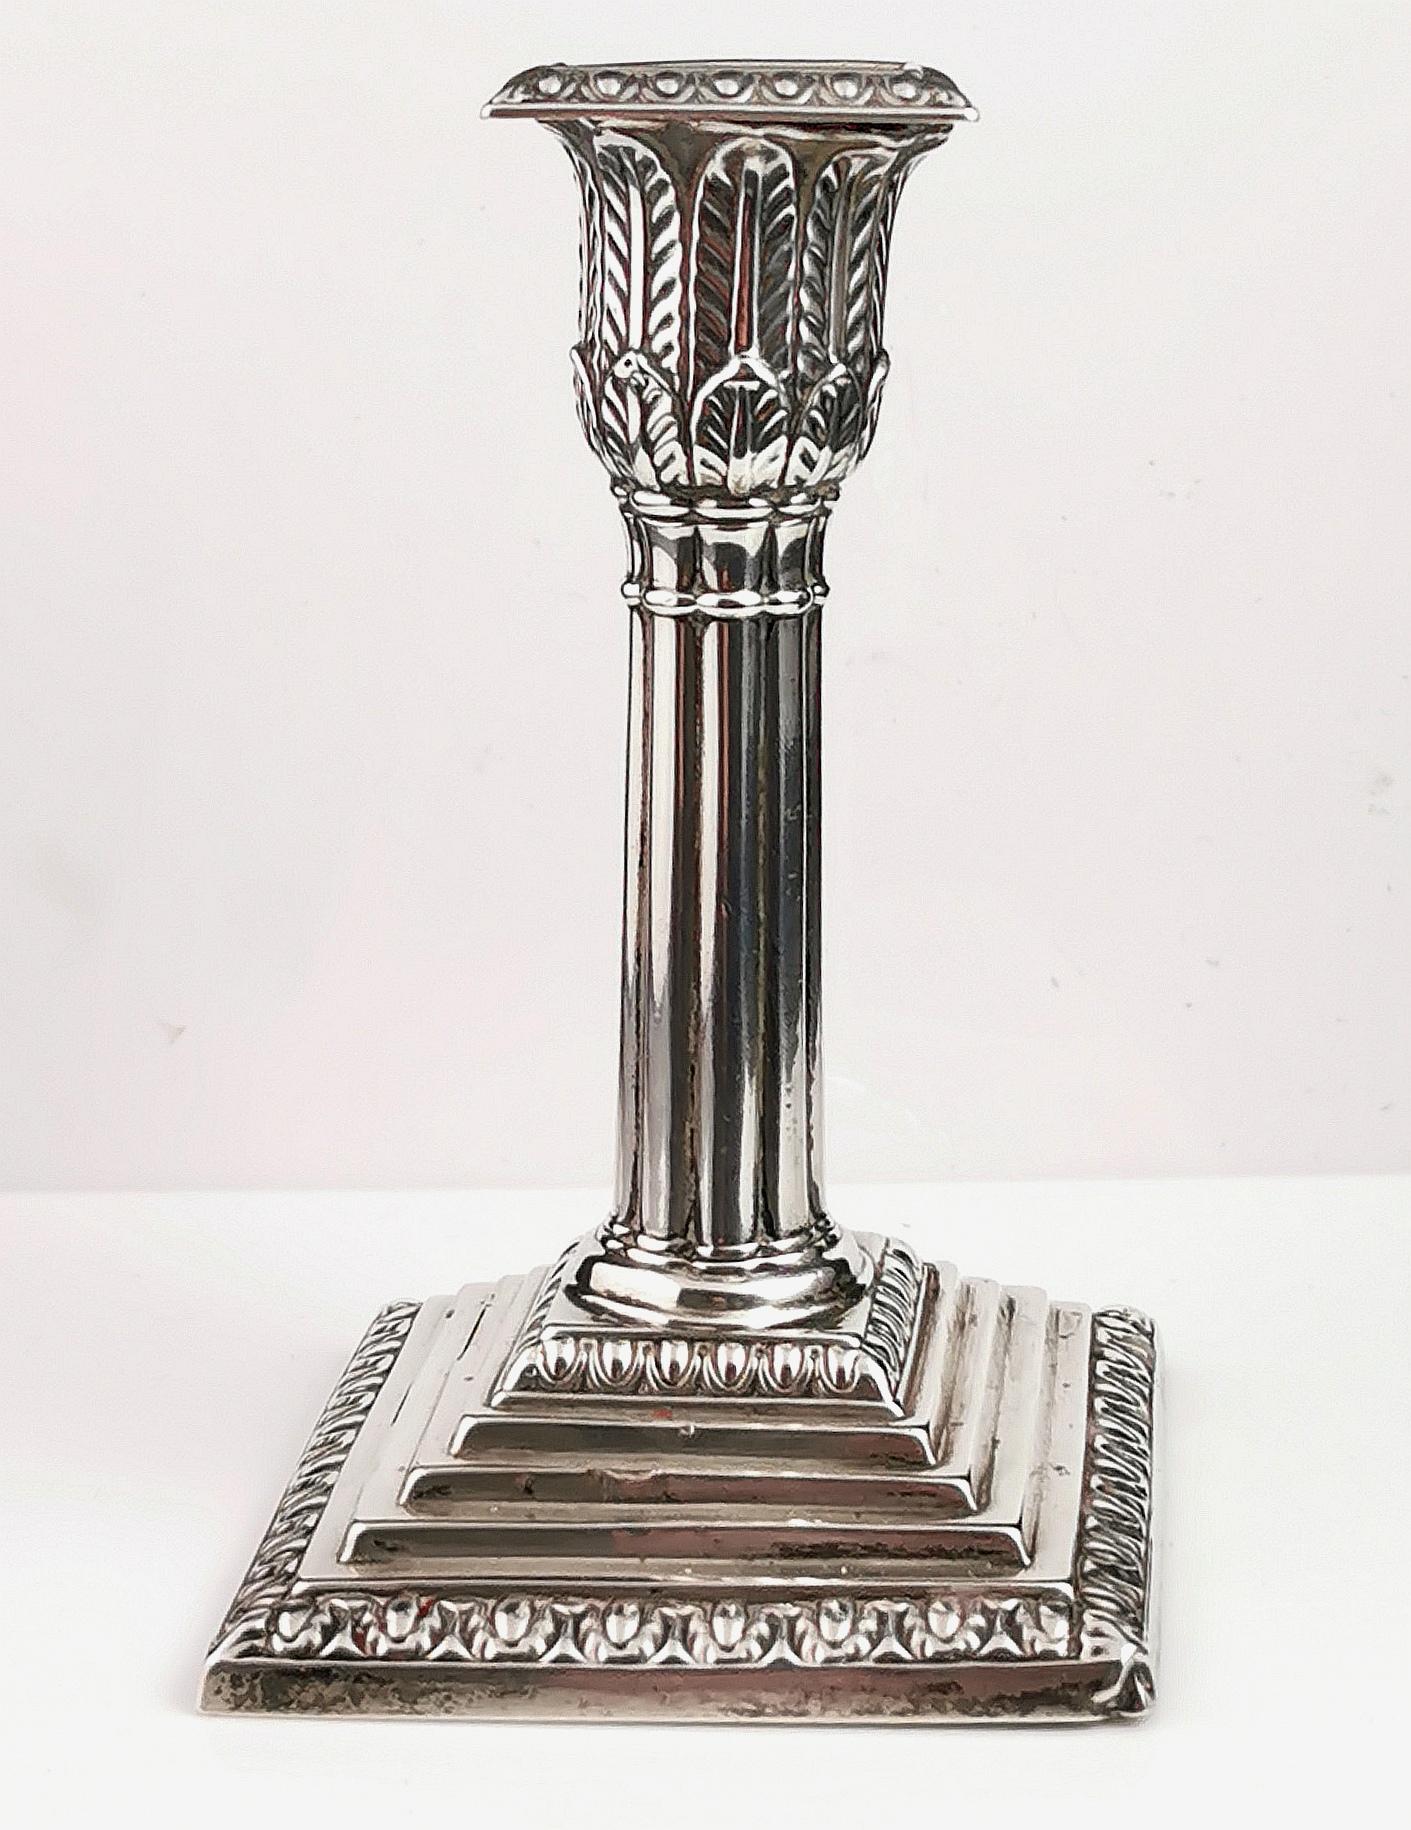 A beautiful and grand antique Victorian sterling silver candlestick.

It is a single candlestick, made from sterling silver with a weighted base and a corinthian column style stem.

Top and base are both squared and decorated with acanthus